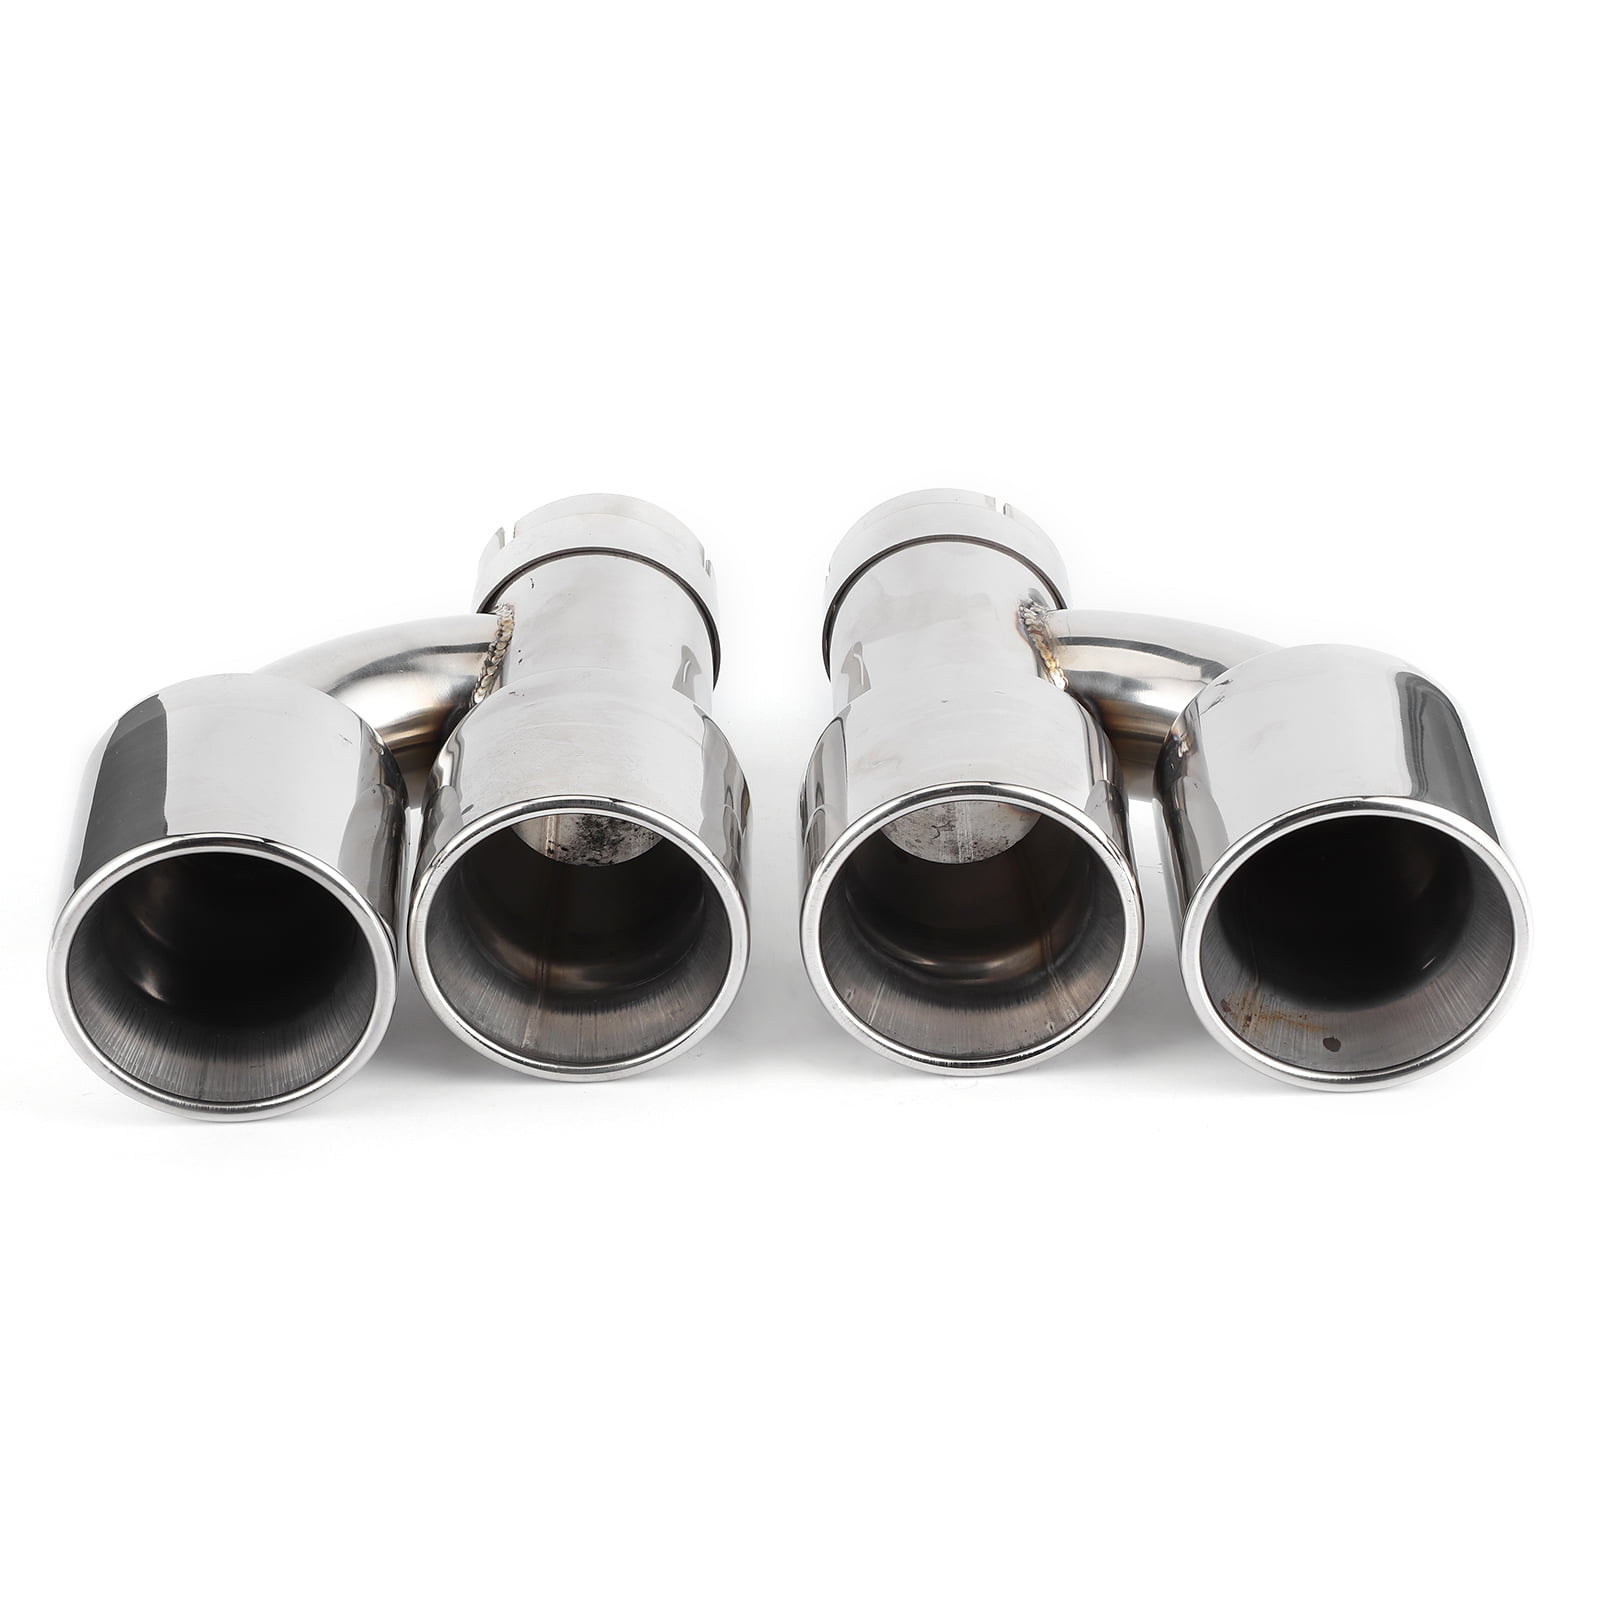 2x 2.5" Inlet 3.5" Outlet Auto Car Exhaust Pipe Tip Tail Muffler Stainless Steel 